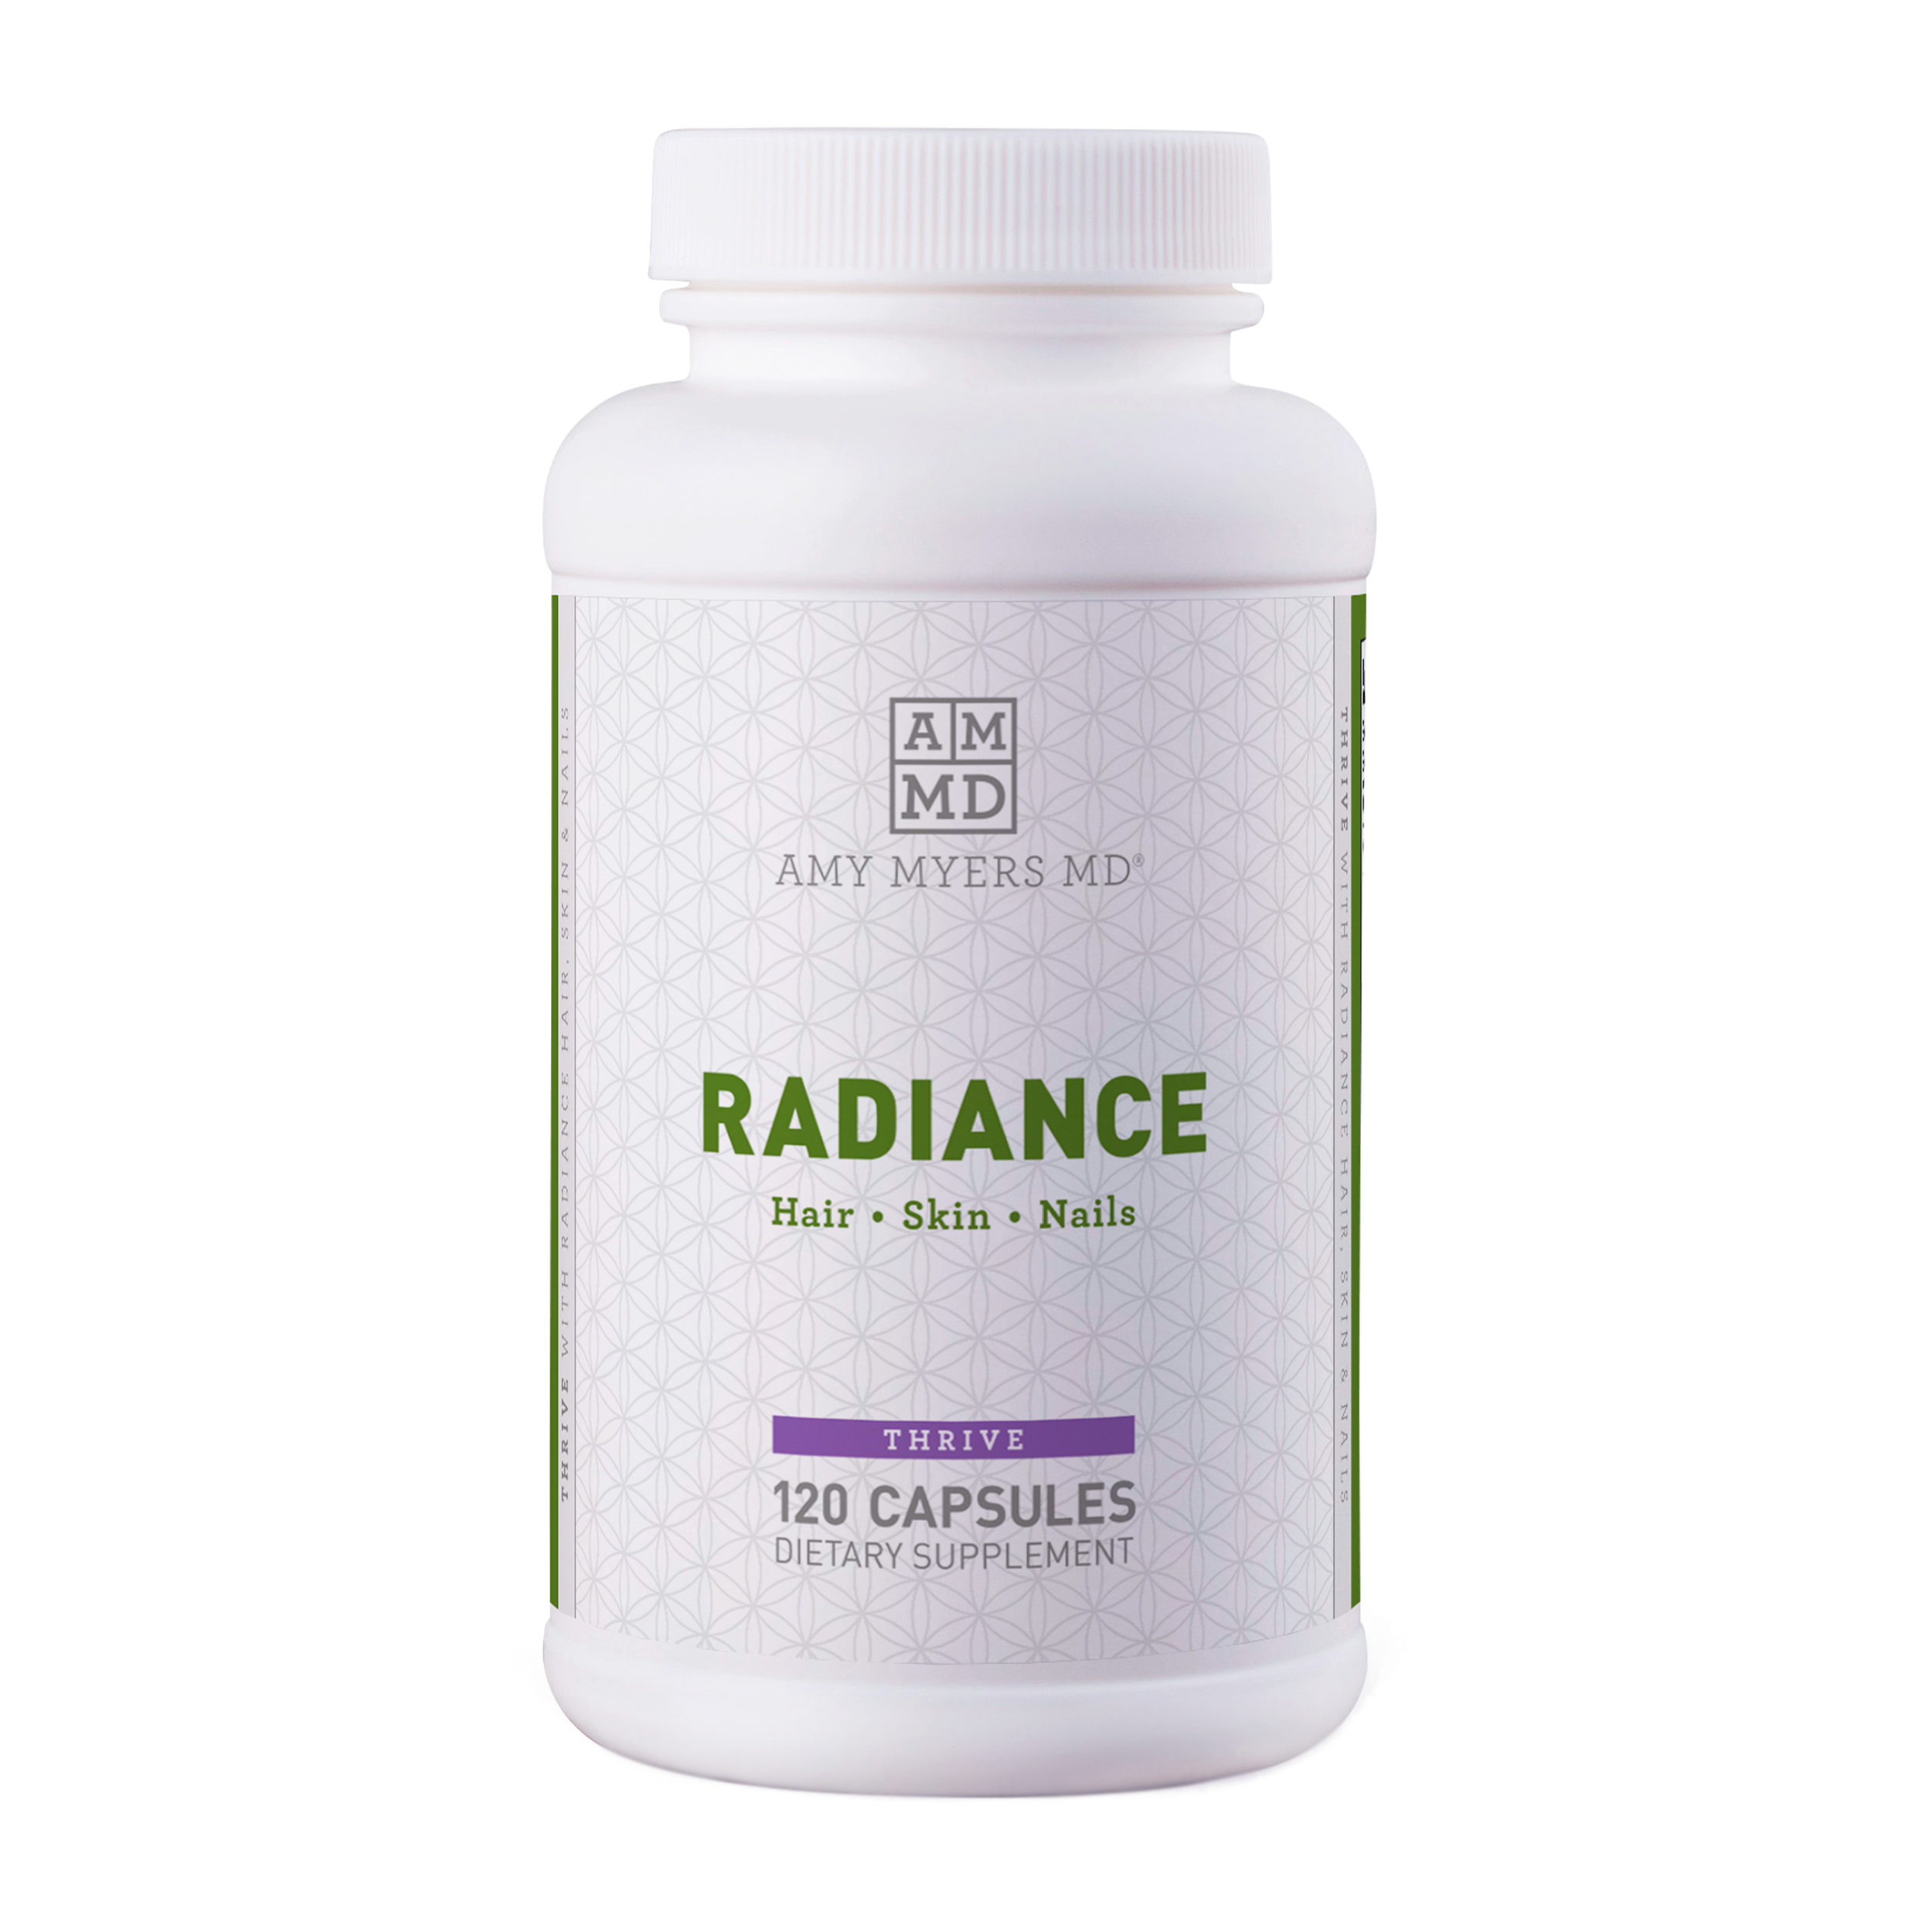 Radiance (Hair, Skin and Nails) - 120 Capsules | Amy Myers MD